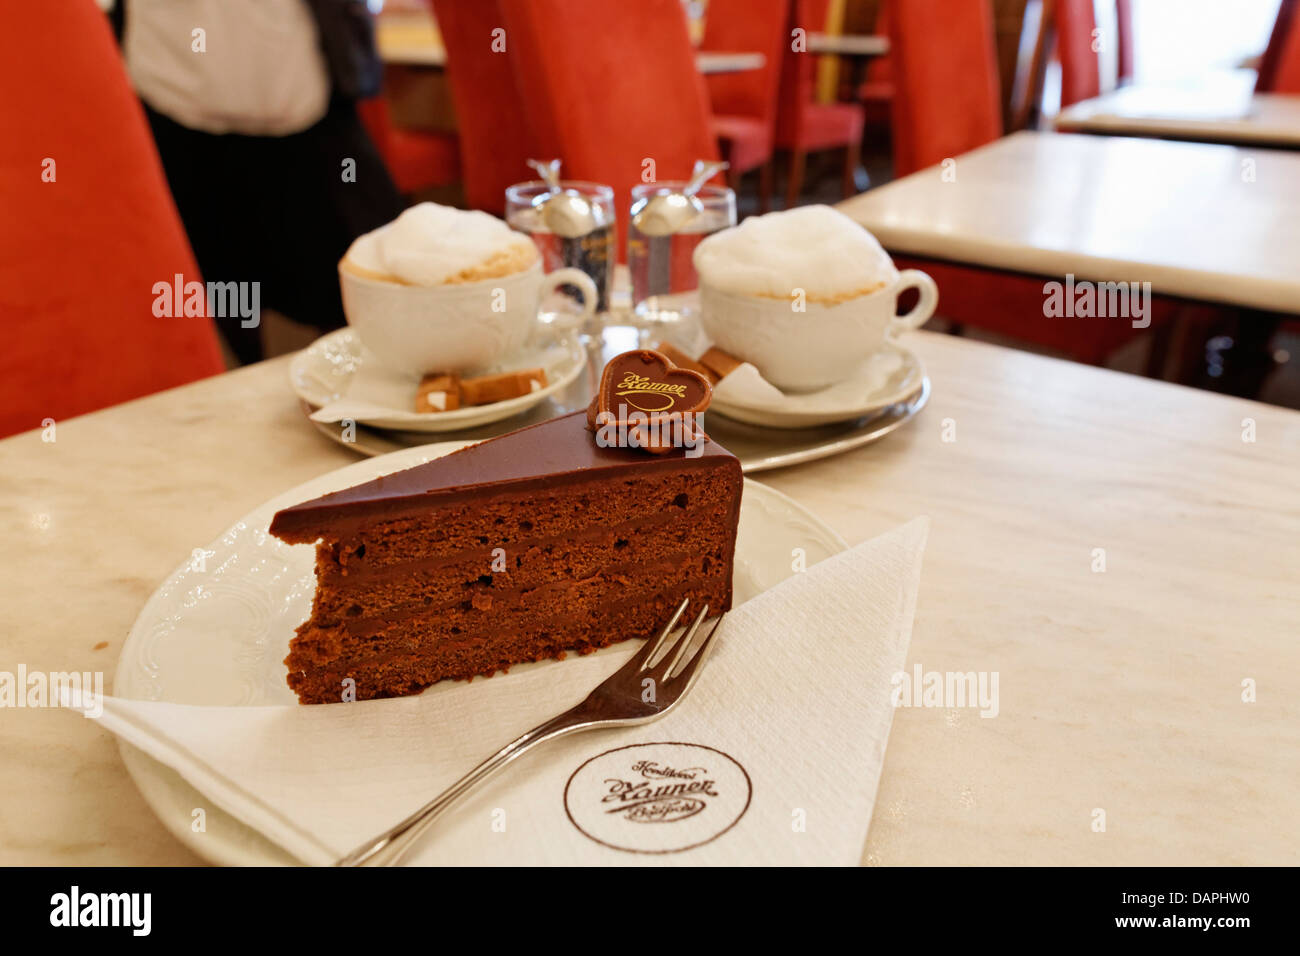 Austria, Upper Austria, Plate of cake with coffee on table Stock Photo